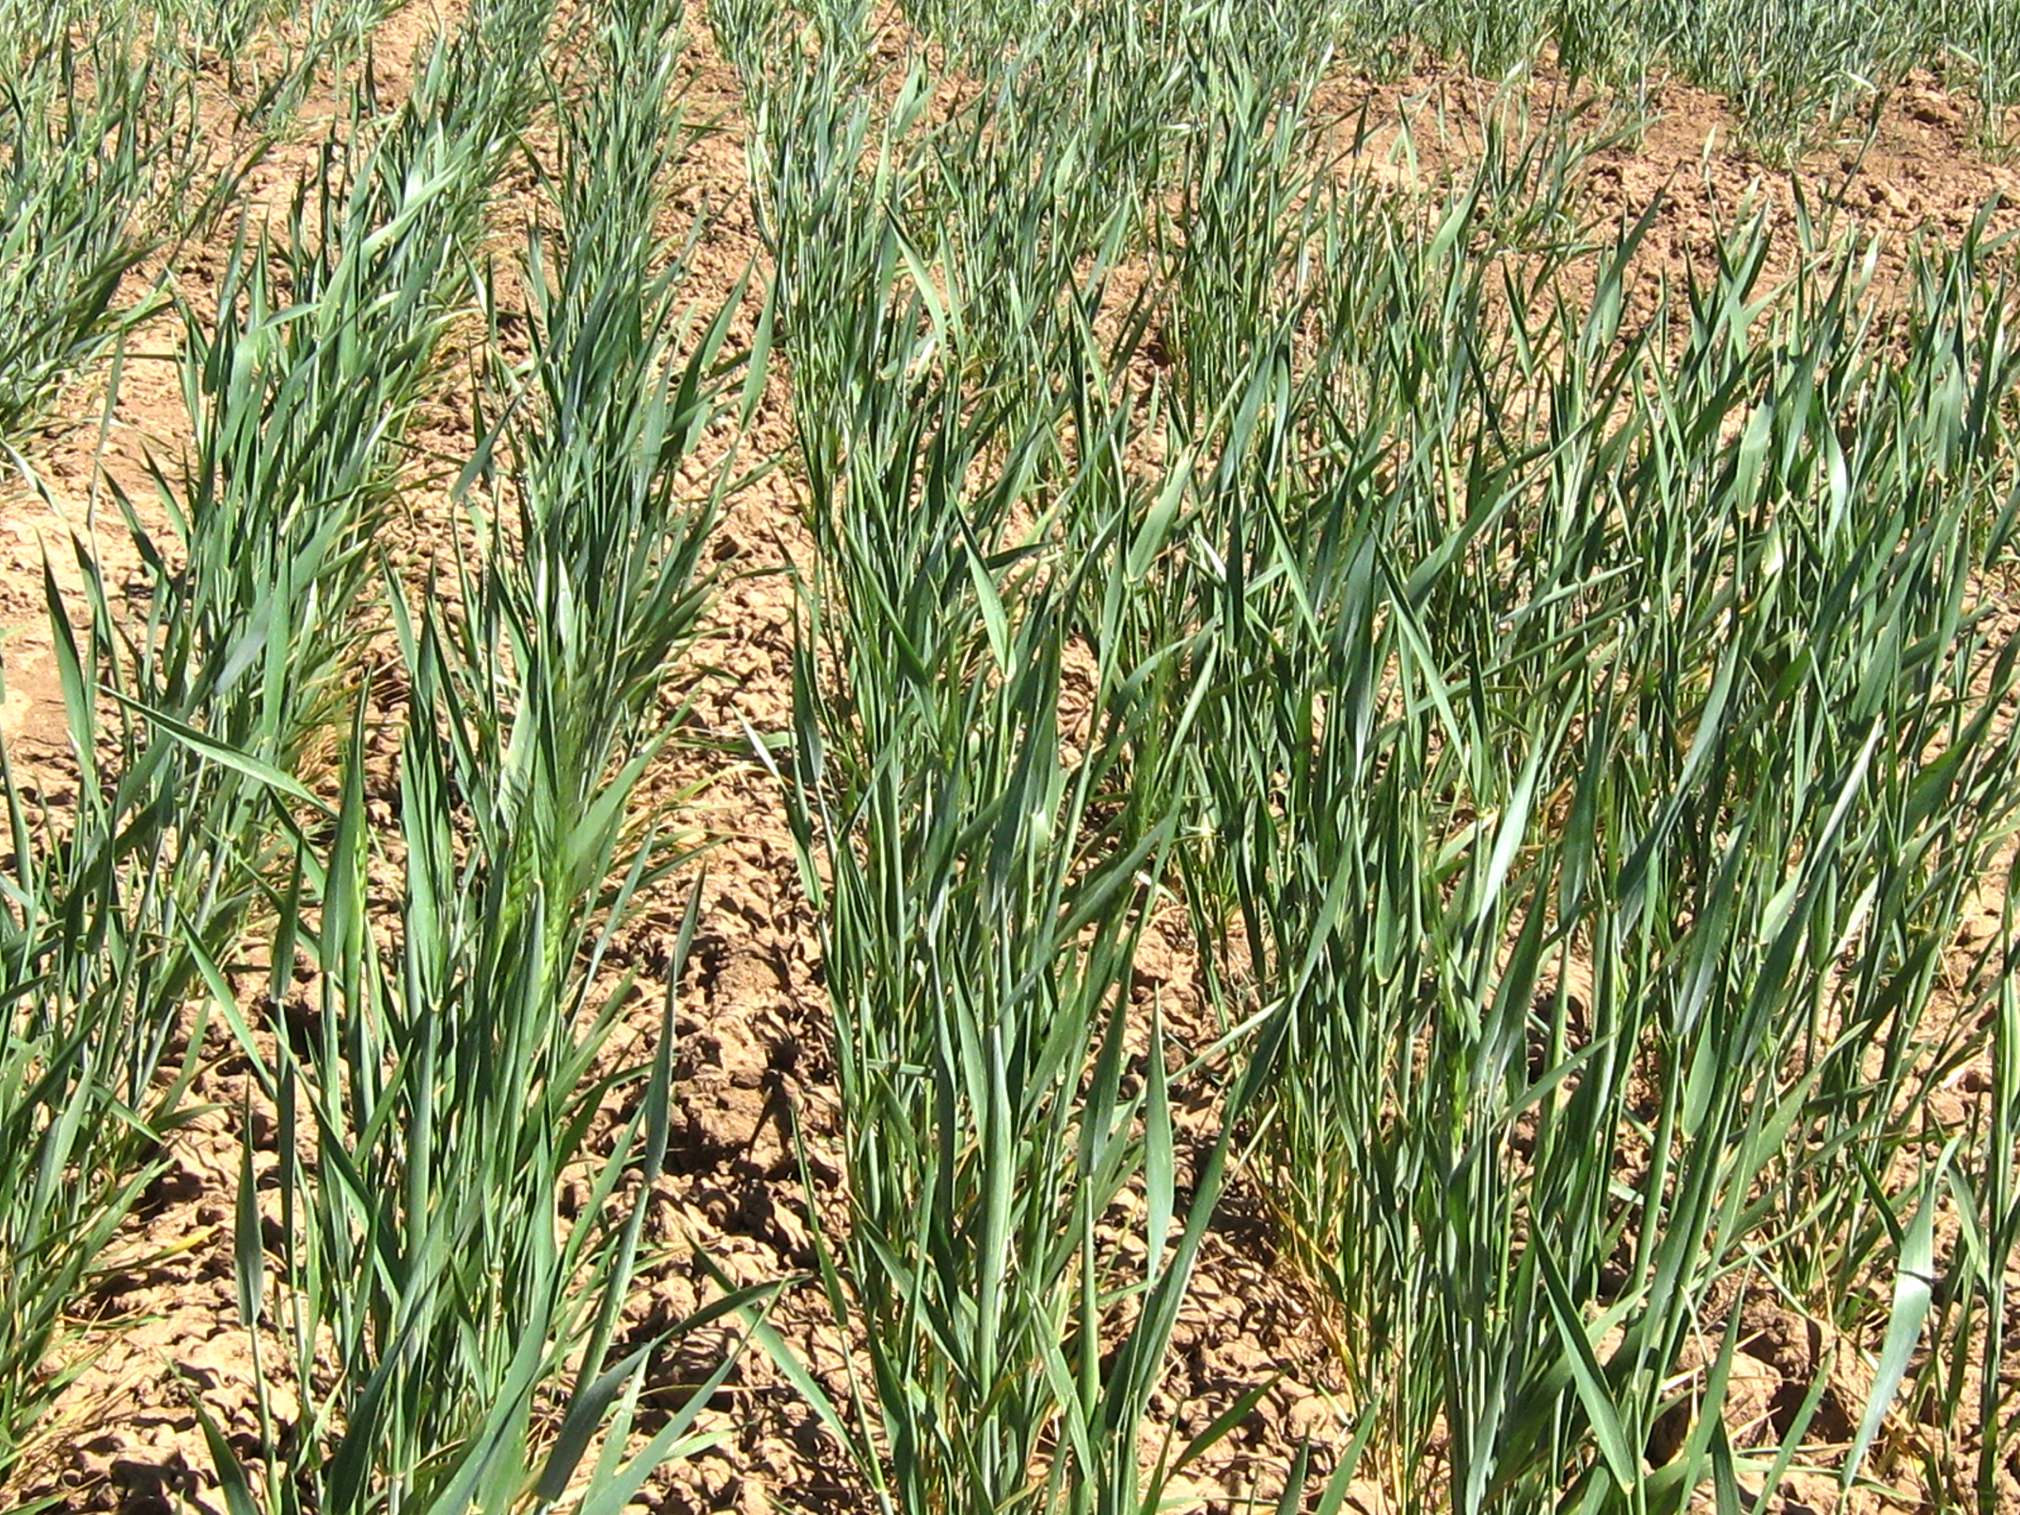 Wheat producers advised to take advantage of existing soil nitrogen ...